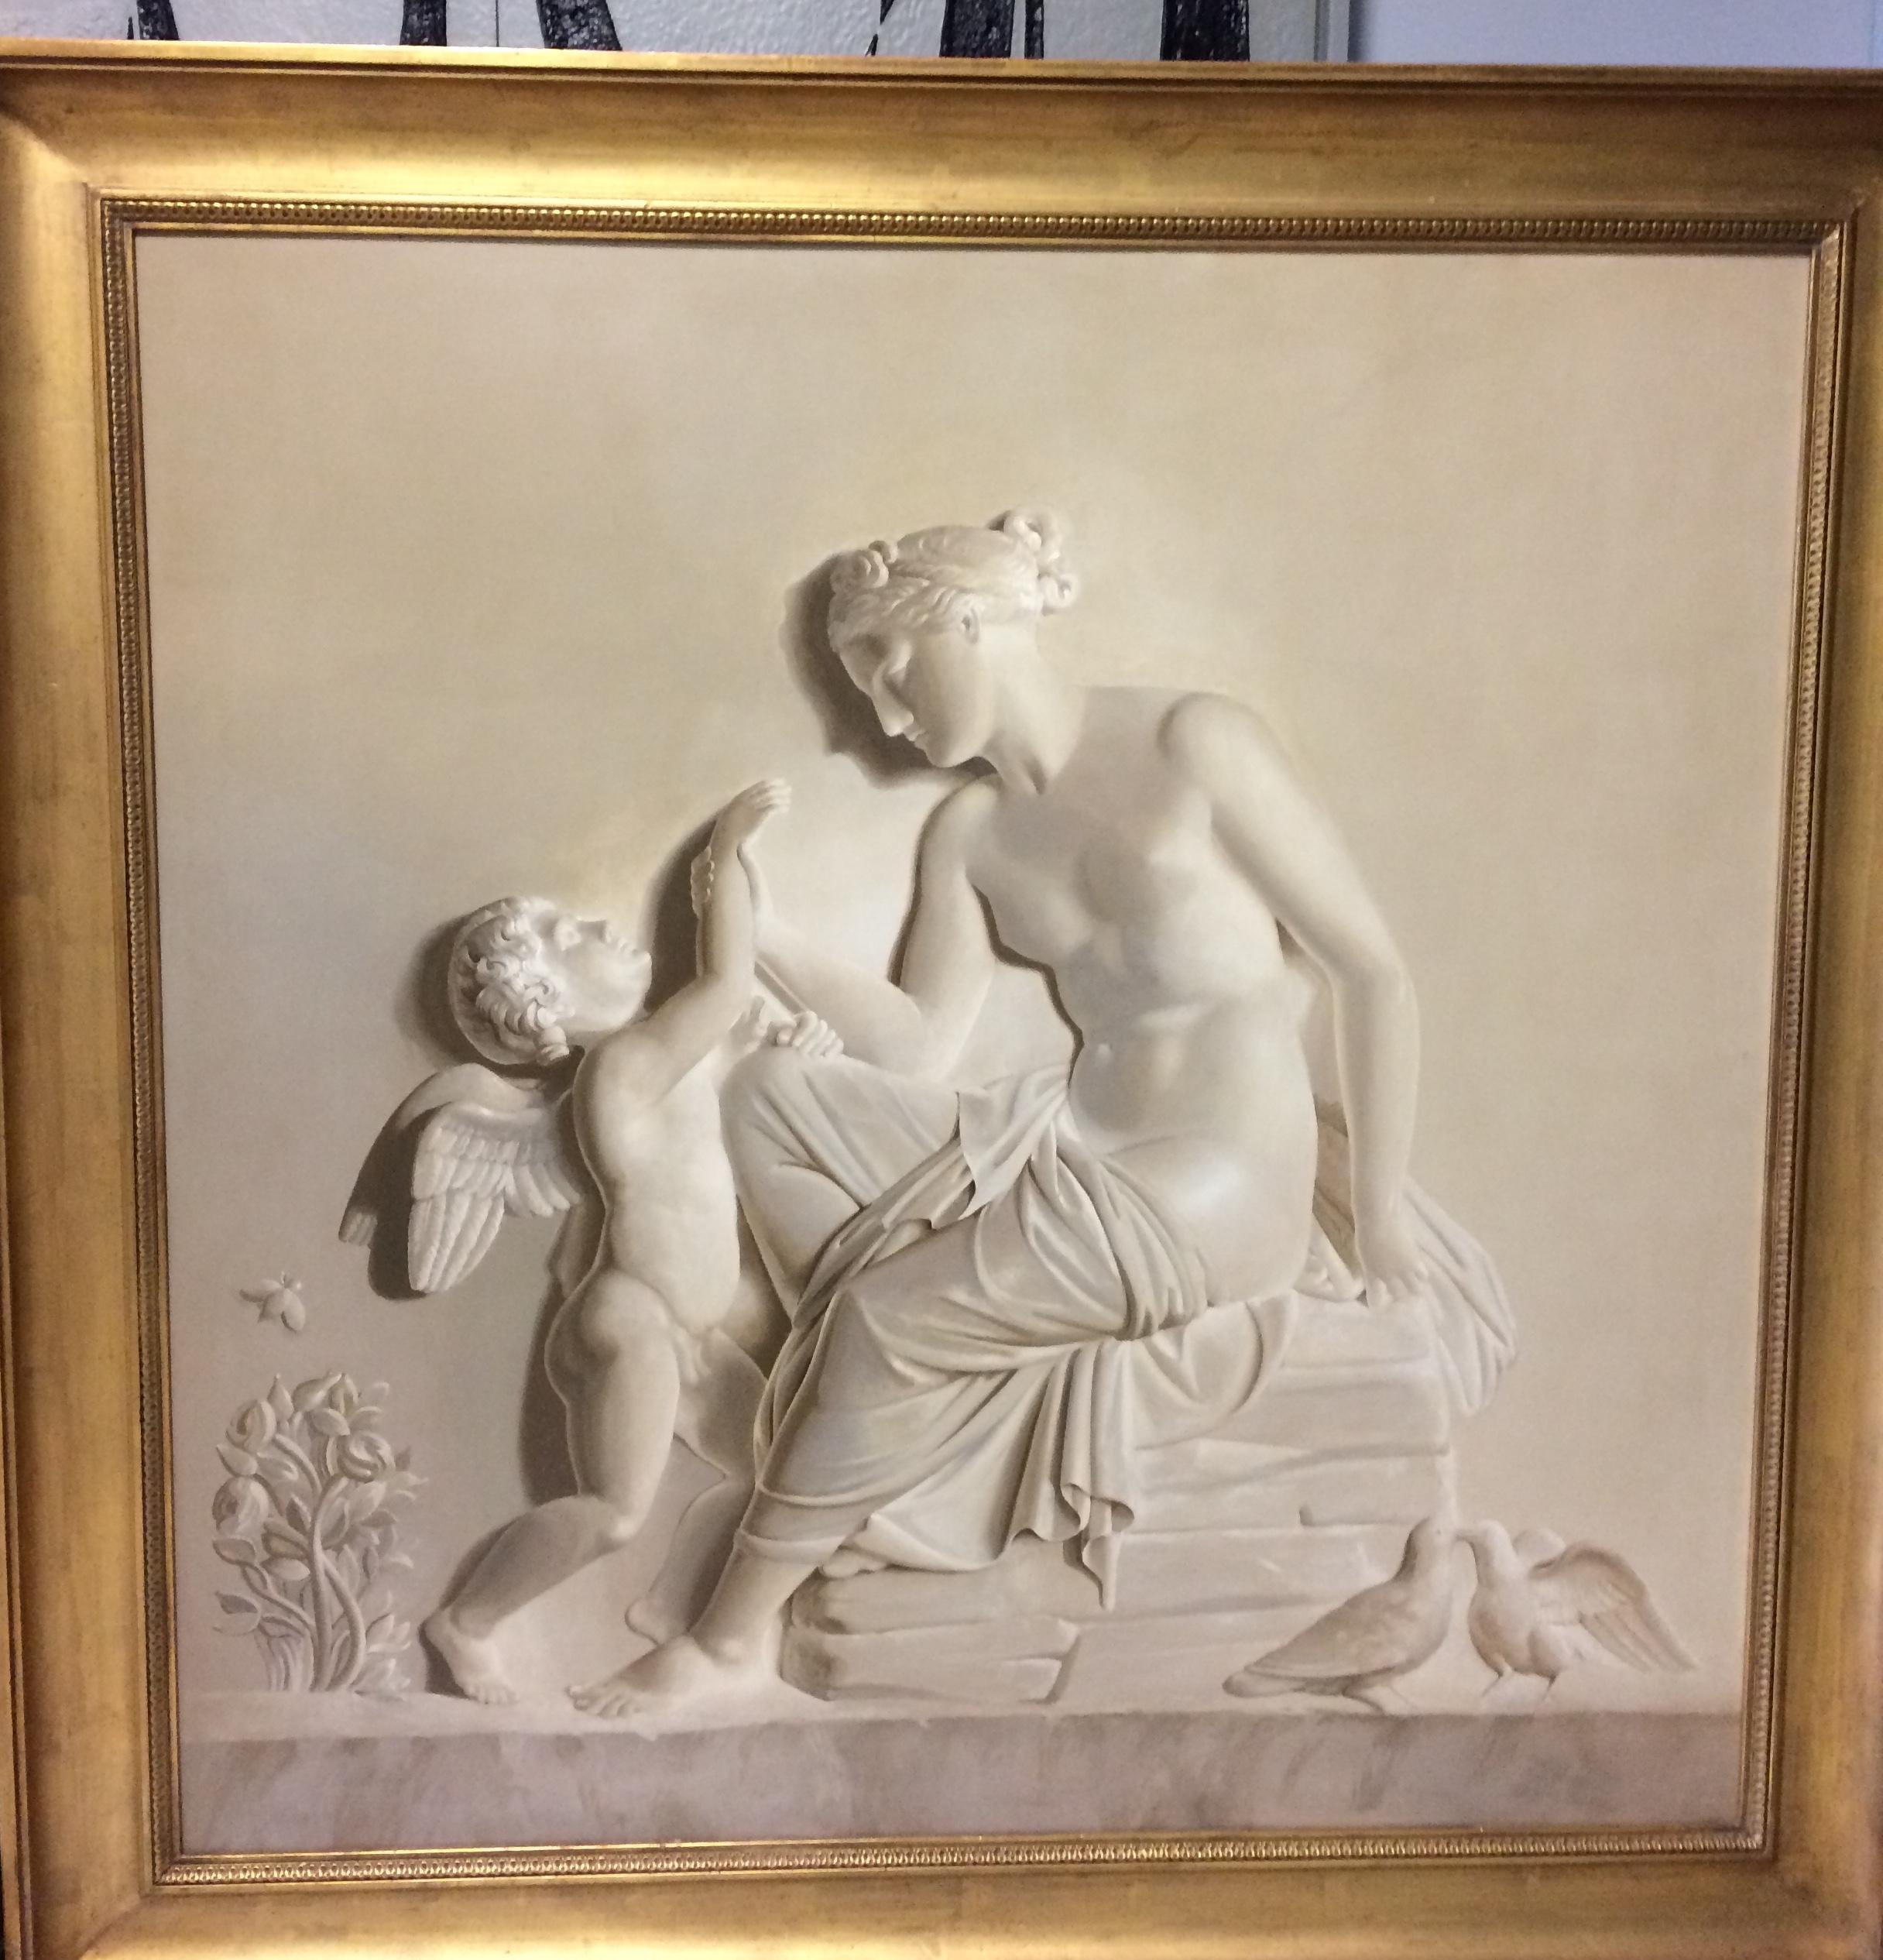 Early 20th century  Italian  Grisaille Paintings , oil on wood after a famous Thorvaldsen reliefs .
Mythological scene with a Finely carved and   gilt- wood frame.
- Cupid Complains to Venus about a Bee Sting.
- Mercury Brings Bacchus to Ino